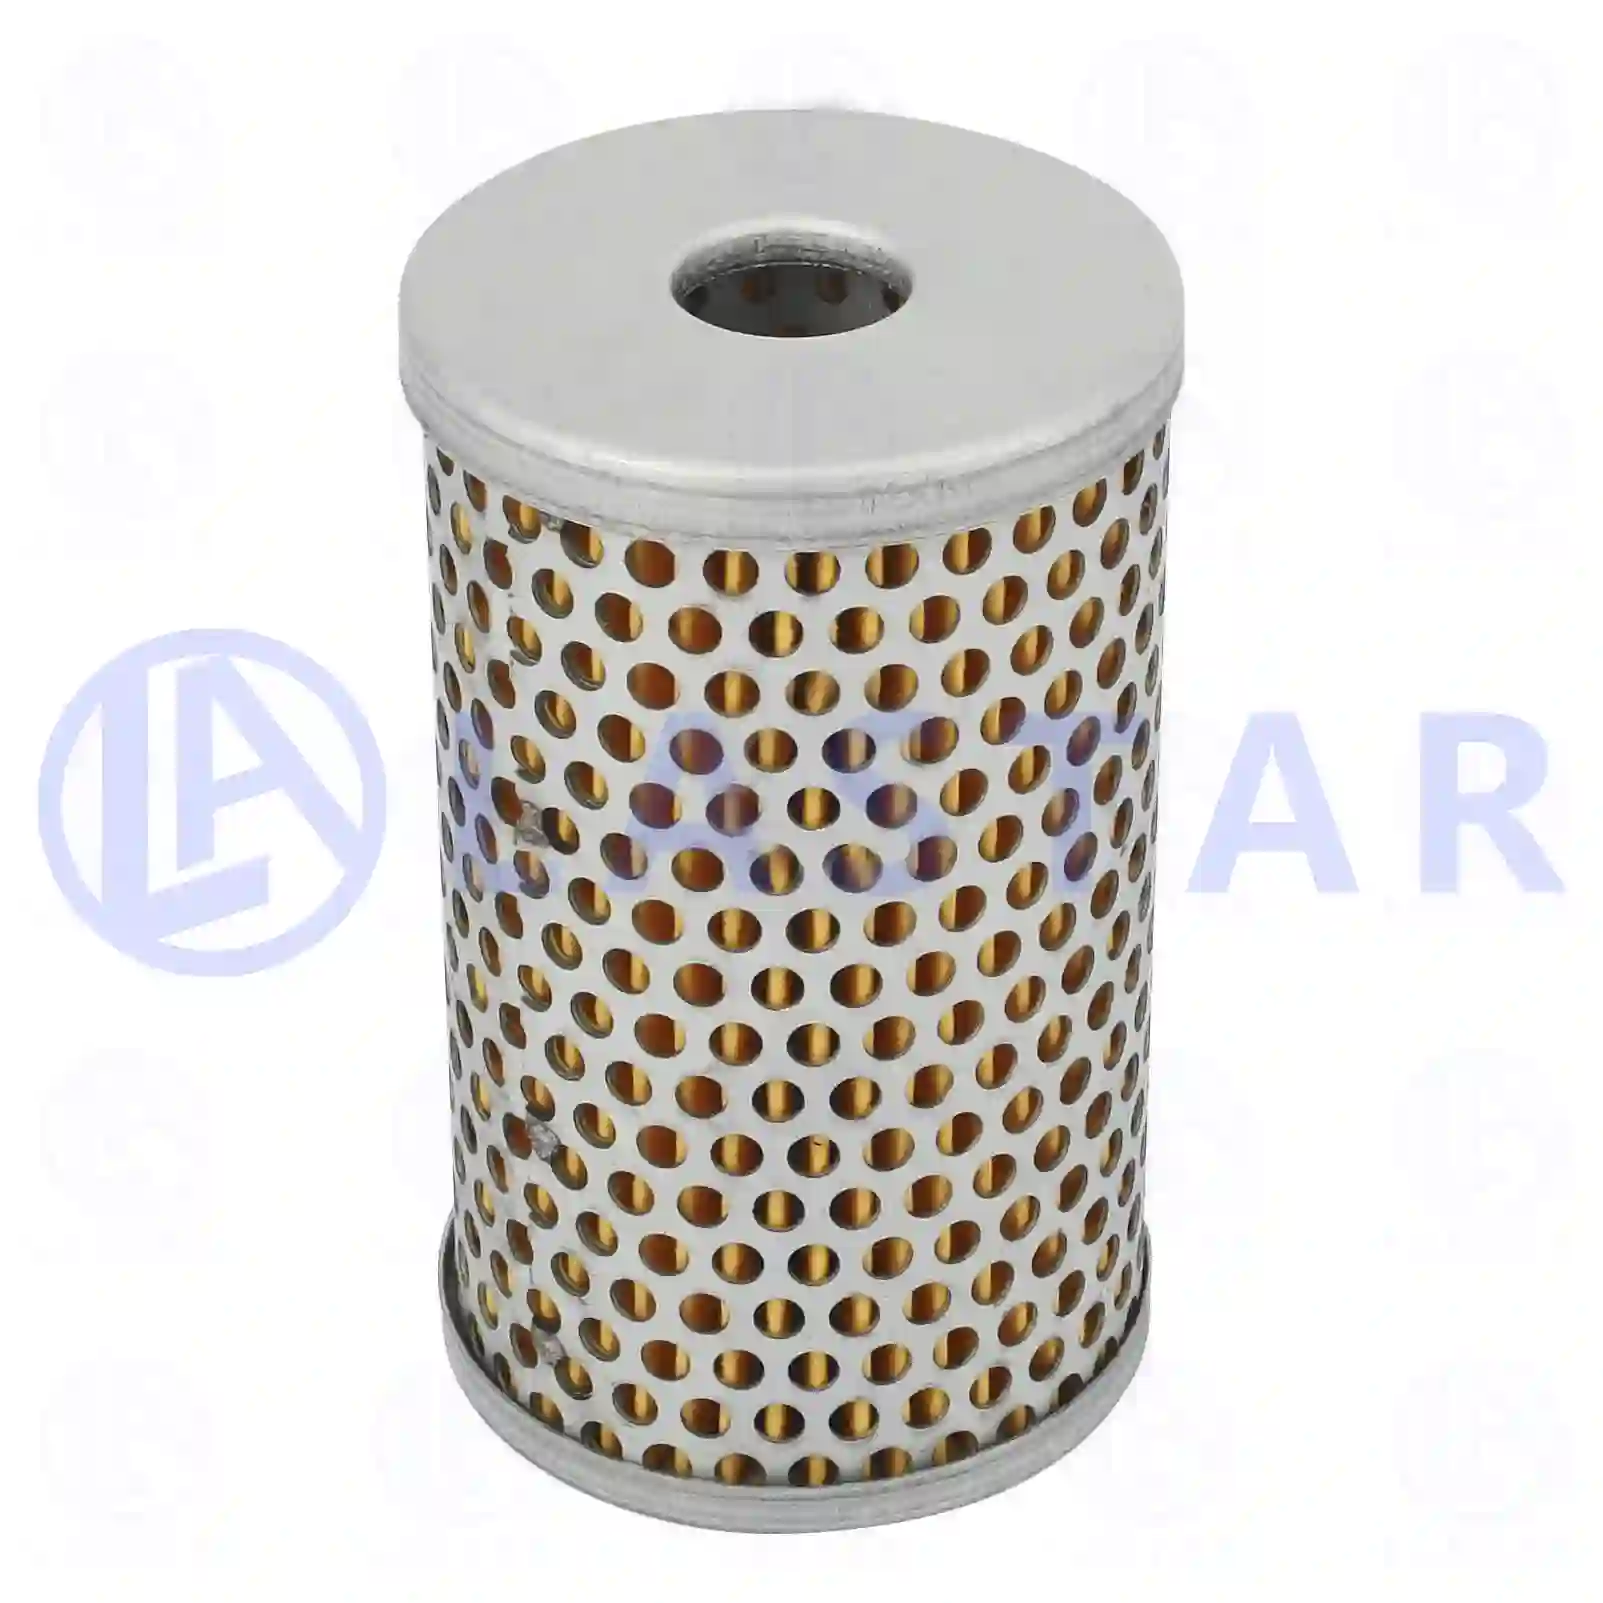 Oil Container, Steering Oil filter insert, la no: 77705048 ,  oem no:01902137, 02966261, T11145397, 0004662804, 0661135, 0661160, 11420661132, 11420661135, 11420661160, 11421256260, 11429061088, 11507423009, 11507425104, 32411120717, 11842225, 1842225, 1844901, 4660204, 4660604, 0229348, 1500663, 2293248, 229348, 491810, 7632141111, 905480, BBU5866, 02966251, 02966261, 2680500218, 00269661, 01902137, 02696621, 02966251, 02966261, 09914553, 42559501, 45481348, 5000674, 5000675, 5000676, 5011425, 5012553, OG0000084646, 5577966, 7984959, 9975217, 5577966, 7984260, 7984959, 93156615, 97094732, 2889829M91, 371912793, 04045601, 00966261, 01268424, 01902137, 01908082, 02696621, 02966251, 02966261, 09914553, 1902137, 2966261, 42553041, 42559501, 503120251, 5000820895, 5001018962, 02966251, 02966261, 81473016005, 81473070008, 85400003330, 2889829, 2889829M91, 0000940404, 0001184225, 0001842225, 0001842325, 0001844701, 0001844901, 0001845801, 0001846301, 0001846525, 0004660204, 0004660404, 0004660604, 0004662804, 0004663004, 0011842225, 0021841125, 1021800109, 1021840425, 8225000030, 8225000232, 013200300, 5000814407, 5000820895, 5001871595, 5021107375, 6005019563, 6005019804, 7400349619, 7420580233, 7421392404, 8499135552, HD604, 00119590, 1343242, 153465, 153468, 1953094, 8225000030, 8225000232, 1296311510, 1696311510, 5104504020, 480A4700748, 480A470060, 480A470748, 5011070580, 216230, 632114112, 15856180, 20580233, 21392404, 349619, 3496191, 3496197, 6612098, 7349619, 85103870, 2V5422384A, 400700504, T11145397, ZG03044-0008 Lastar Spare Part | Truck Spare Parts, Auotomotive Spare Parts